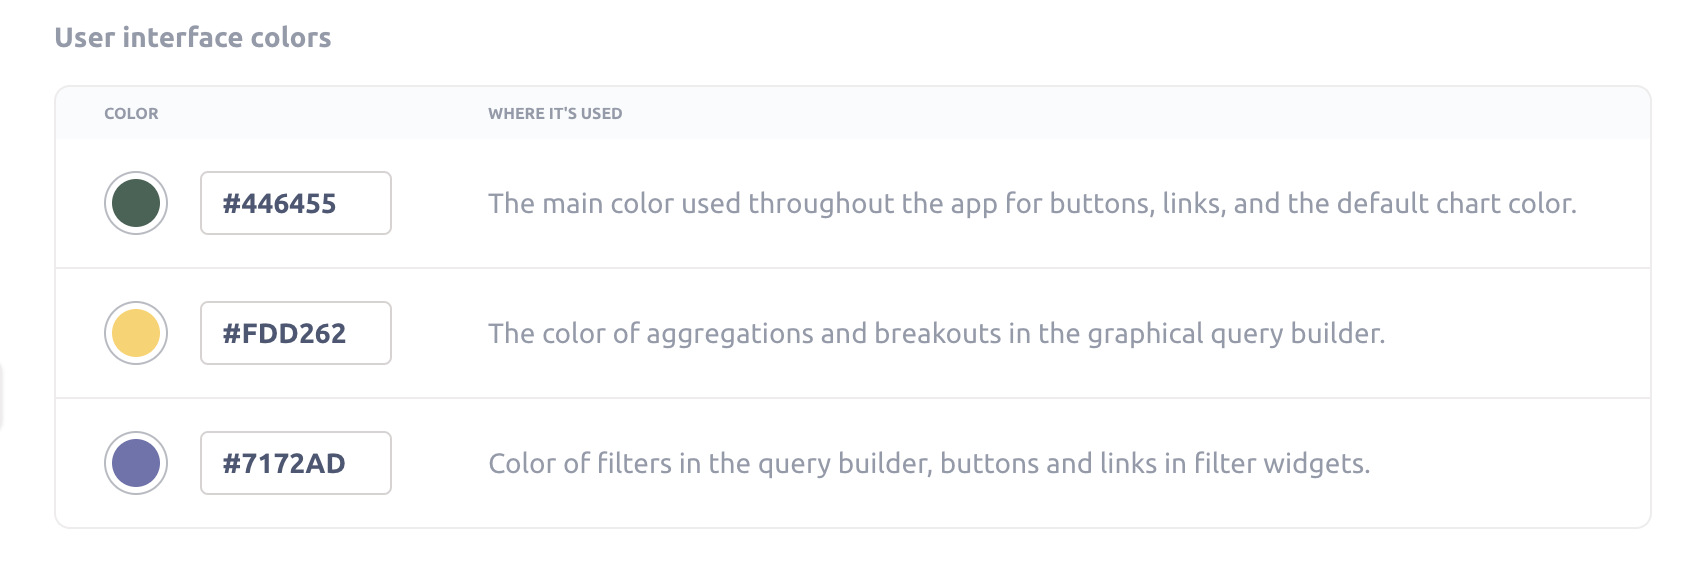 User interface colors